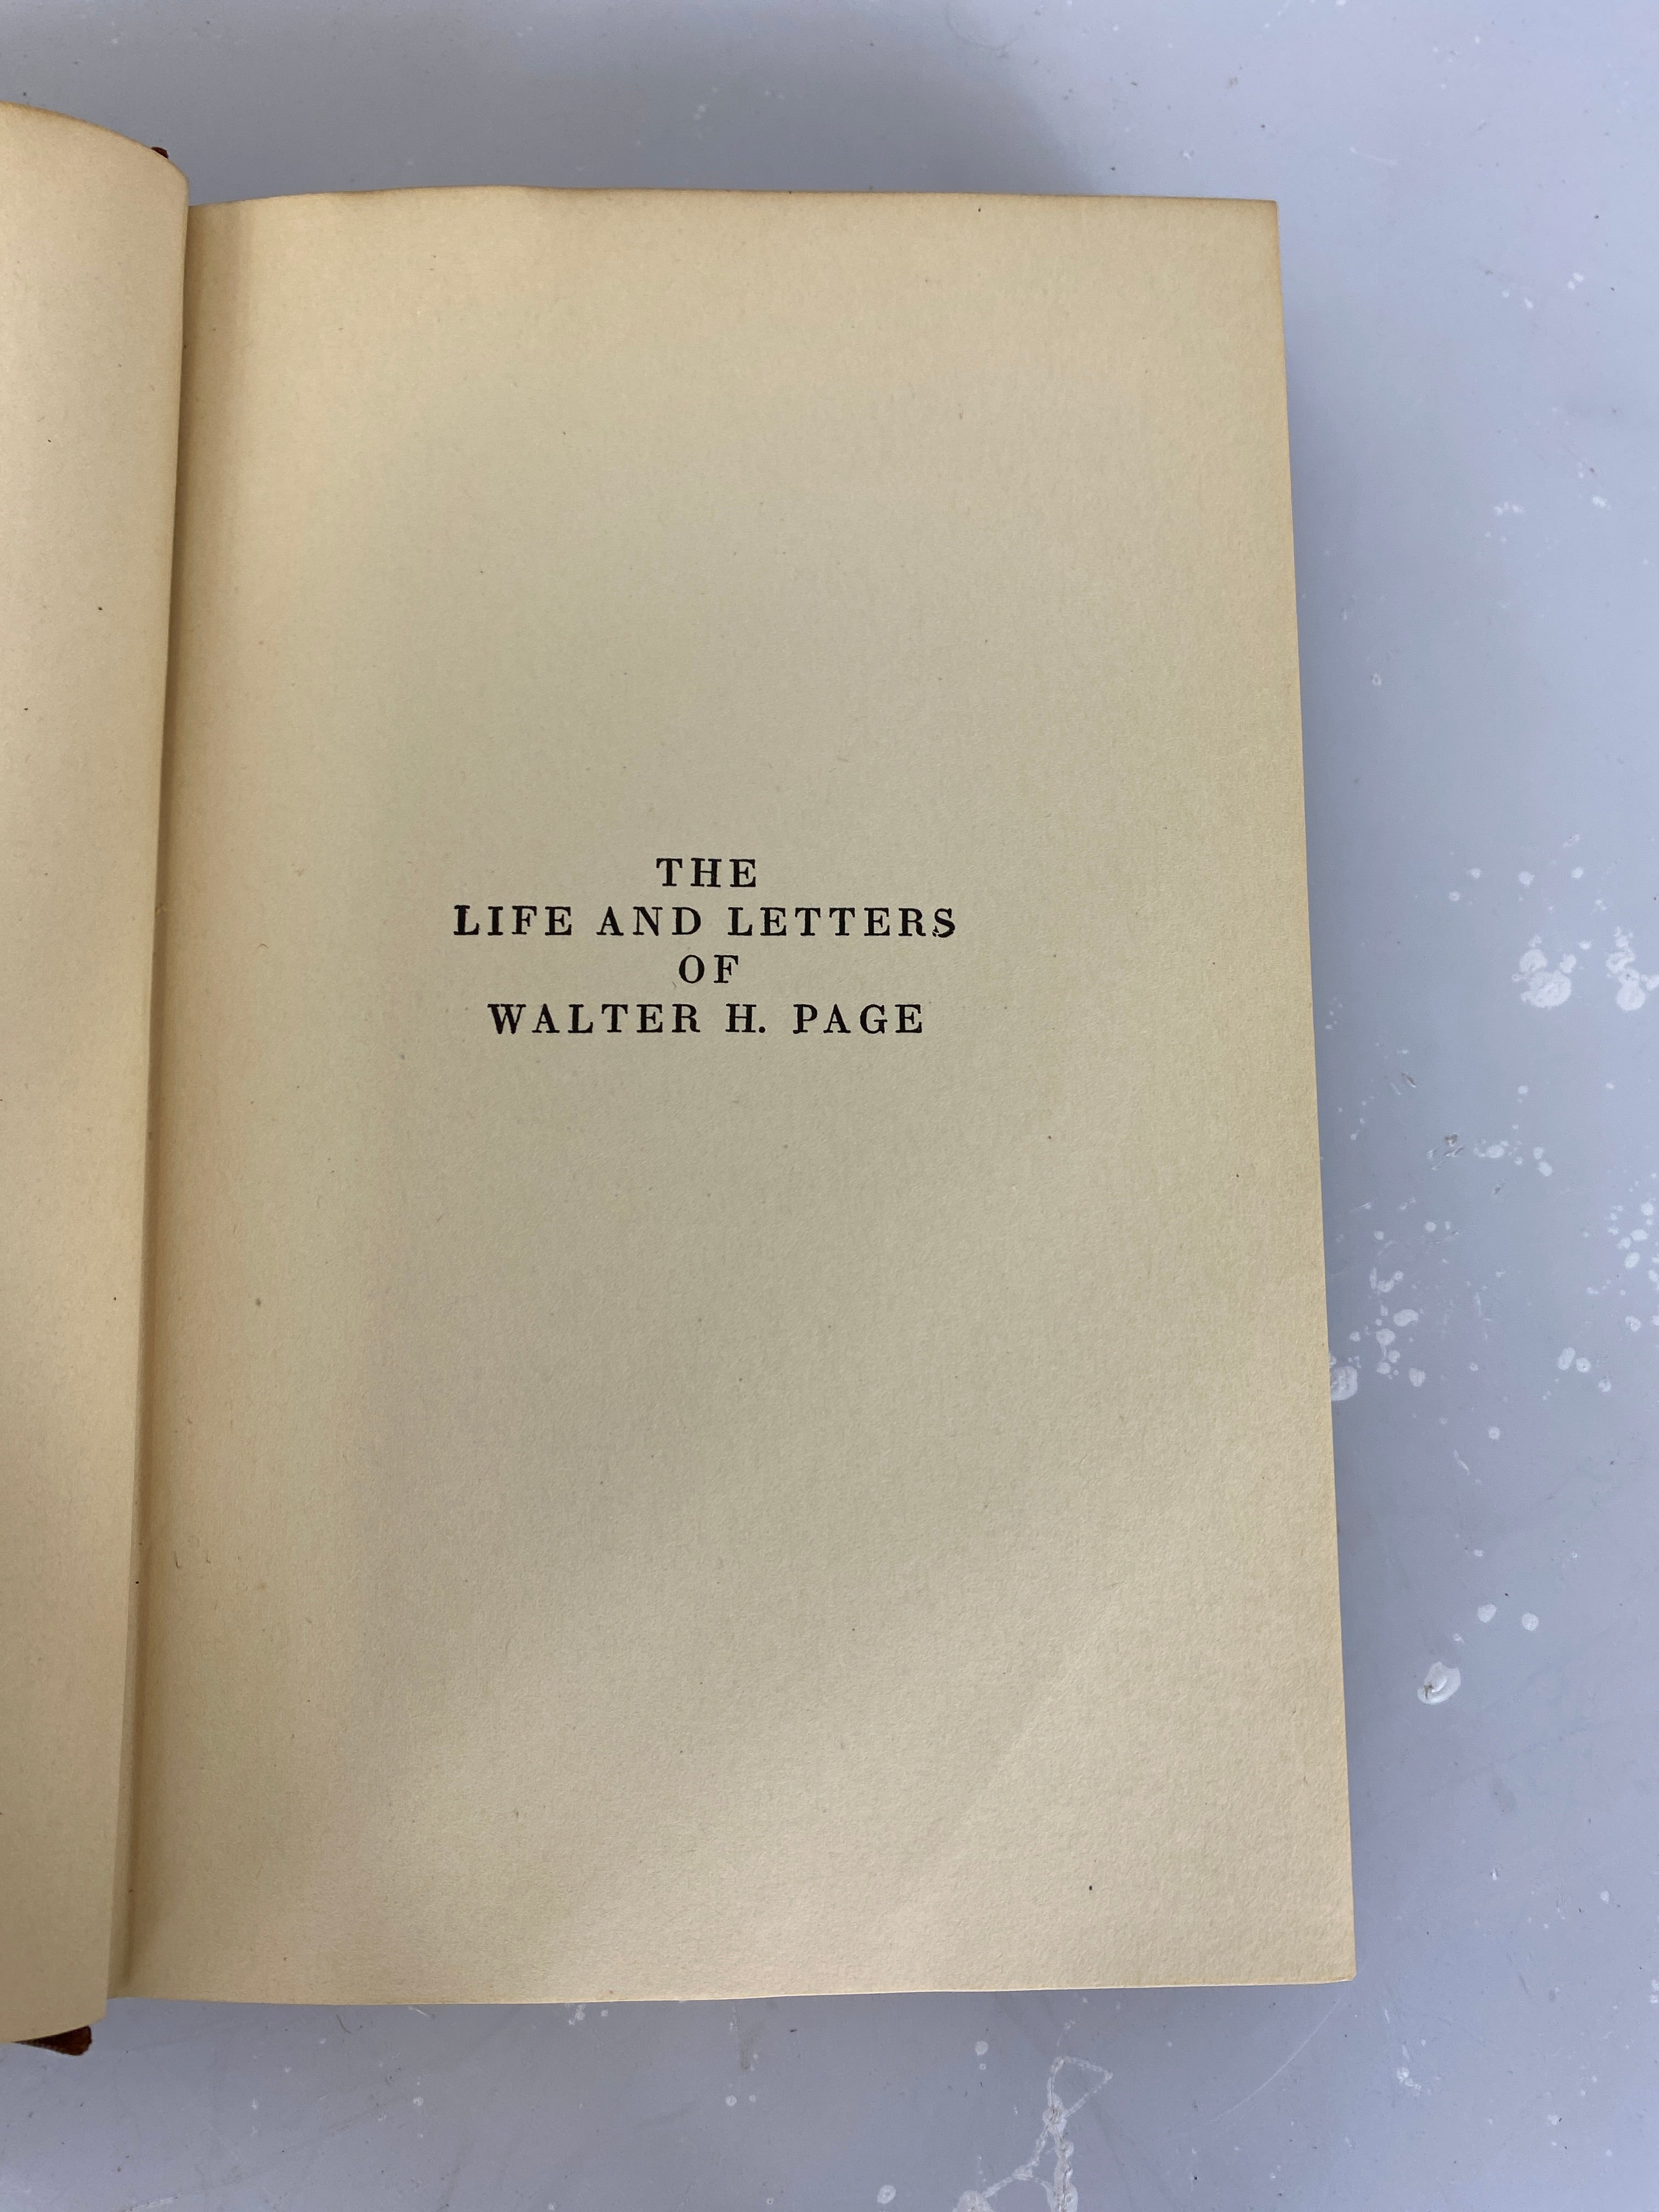 The Life & Letters of Walter H. Page 2 Vol Set by Burton J. Hendrick 1927 HC